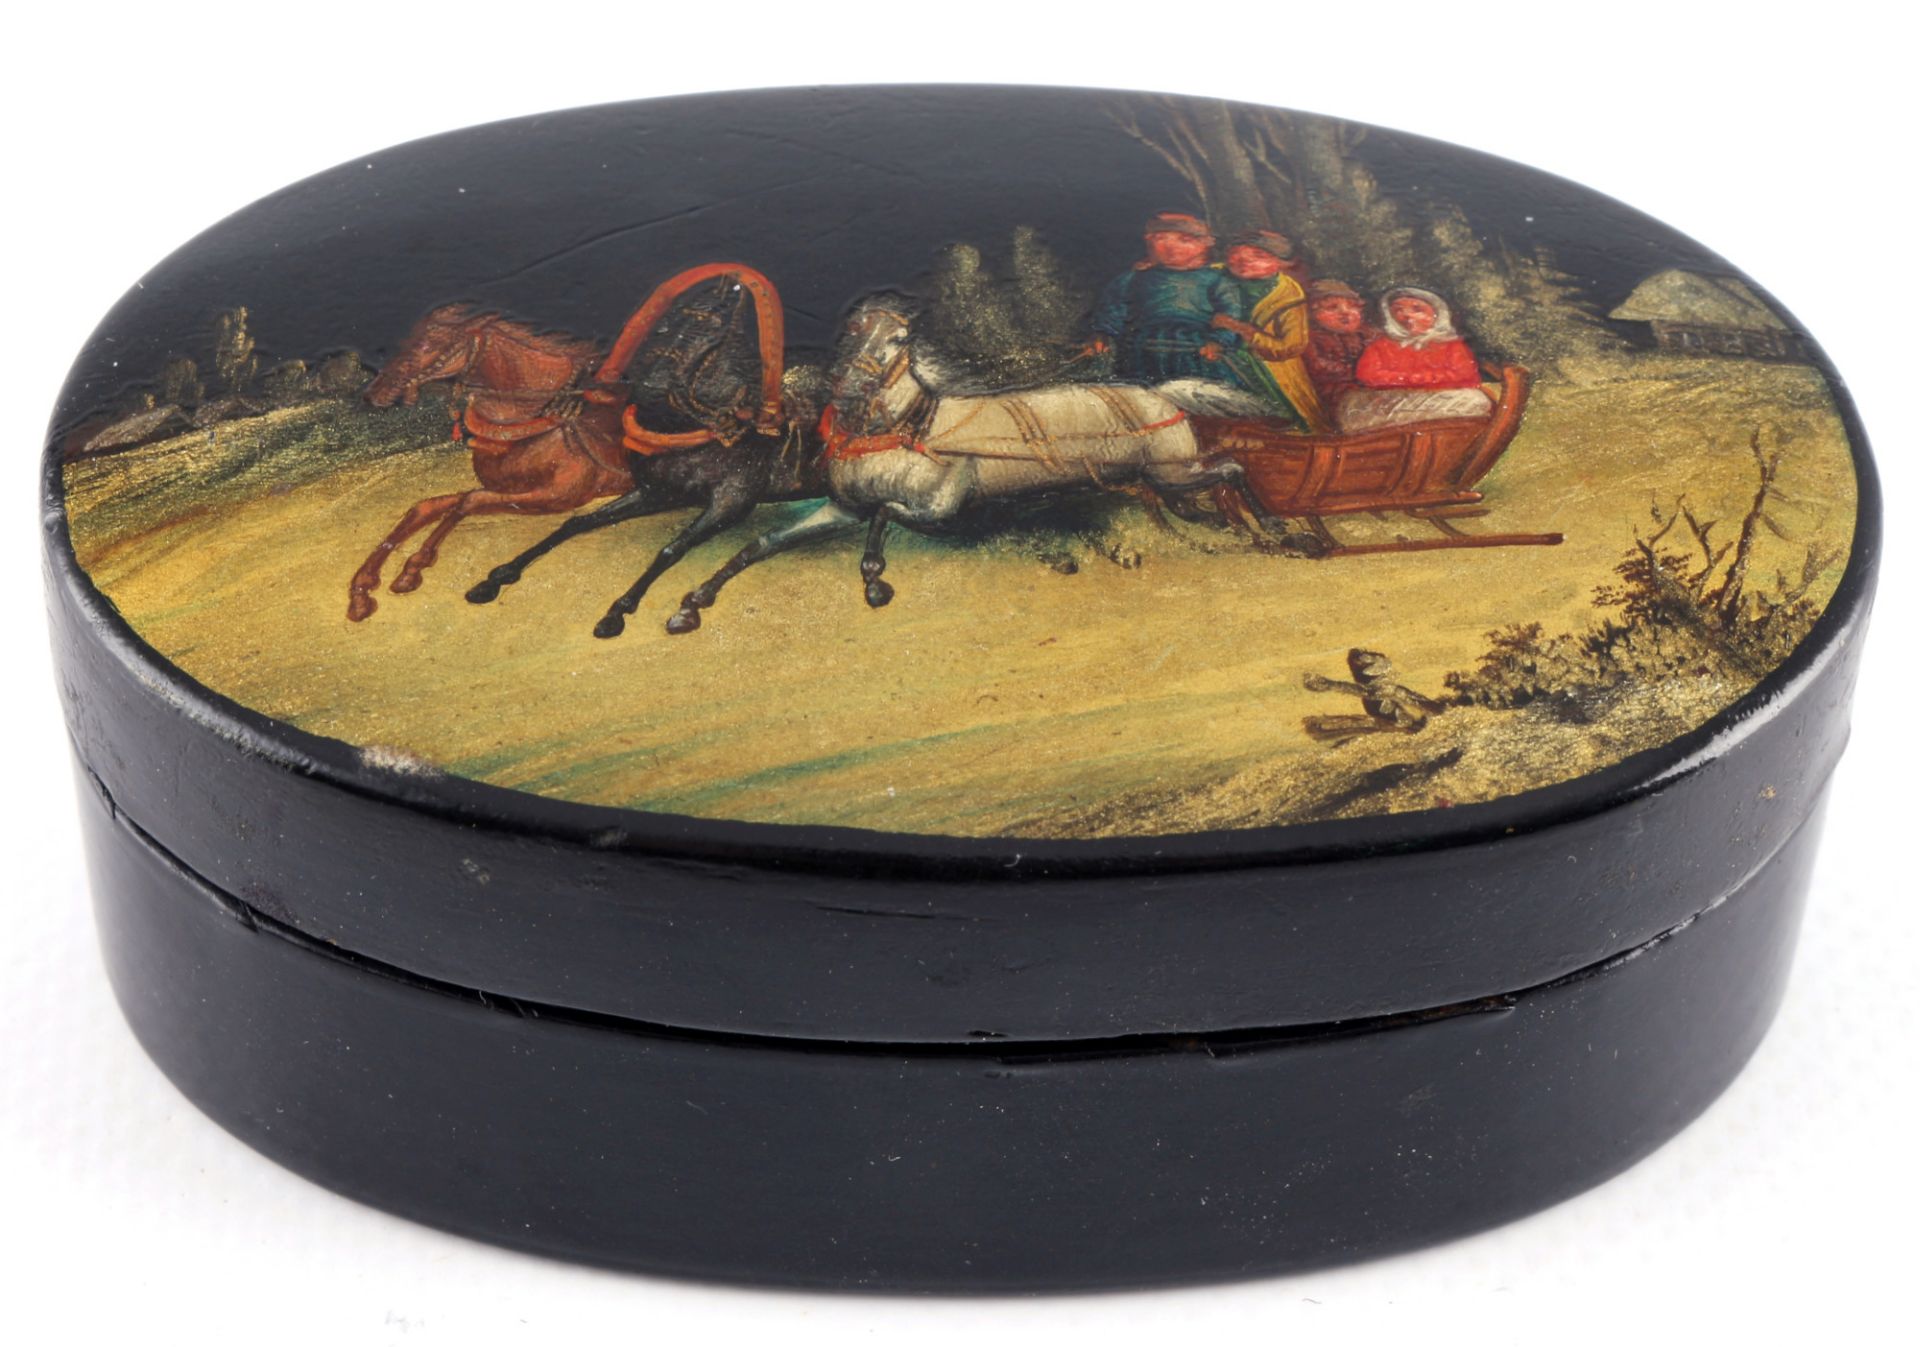 Russia around 1900 lacquered box with troika, Russland Lackdose um 1900 mit Troika,